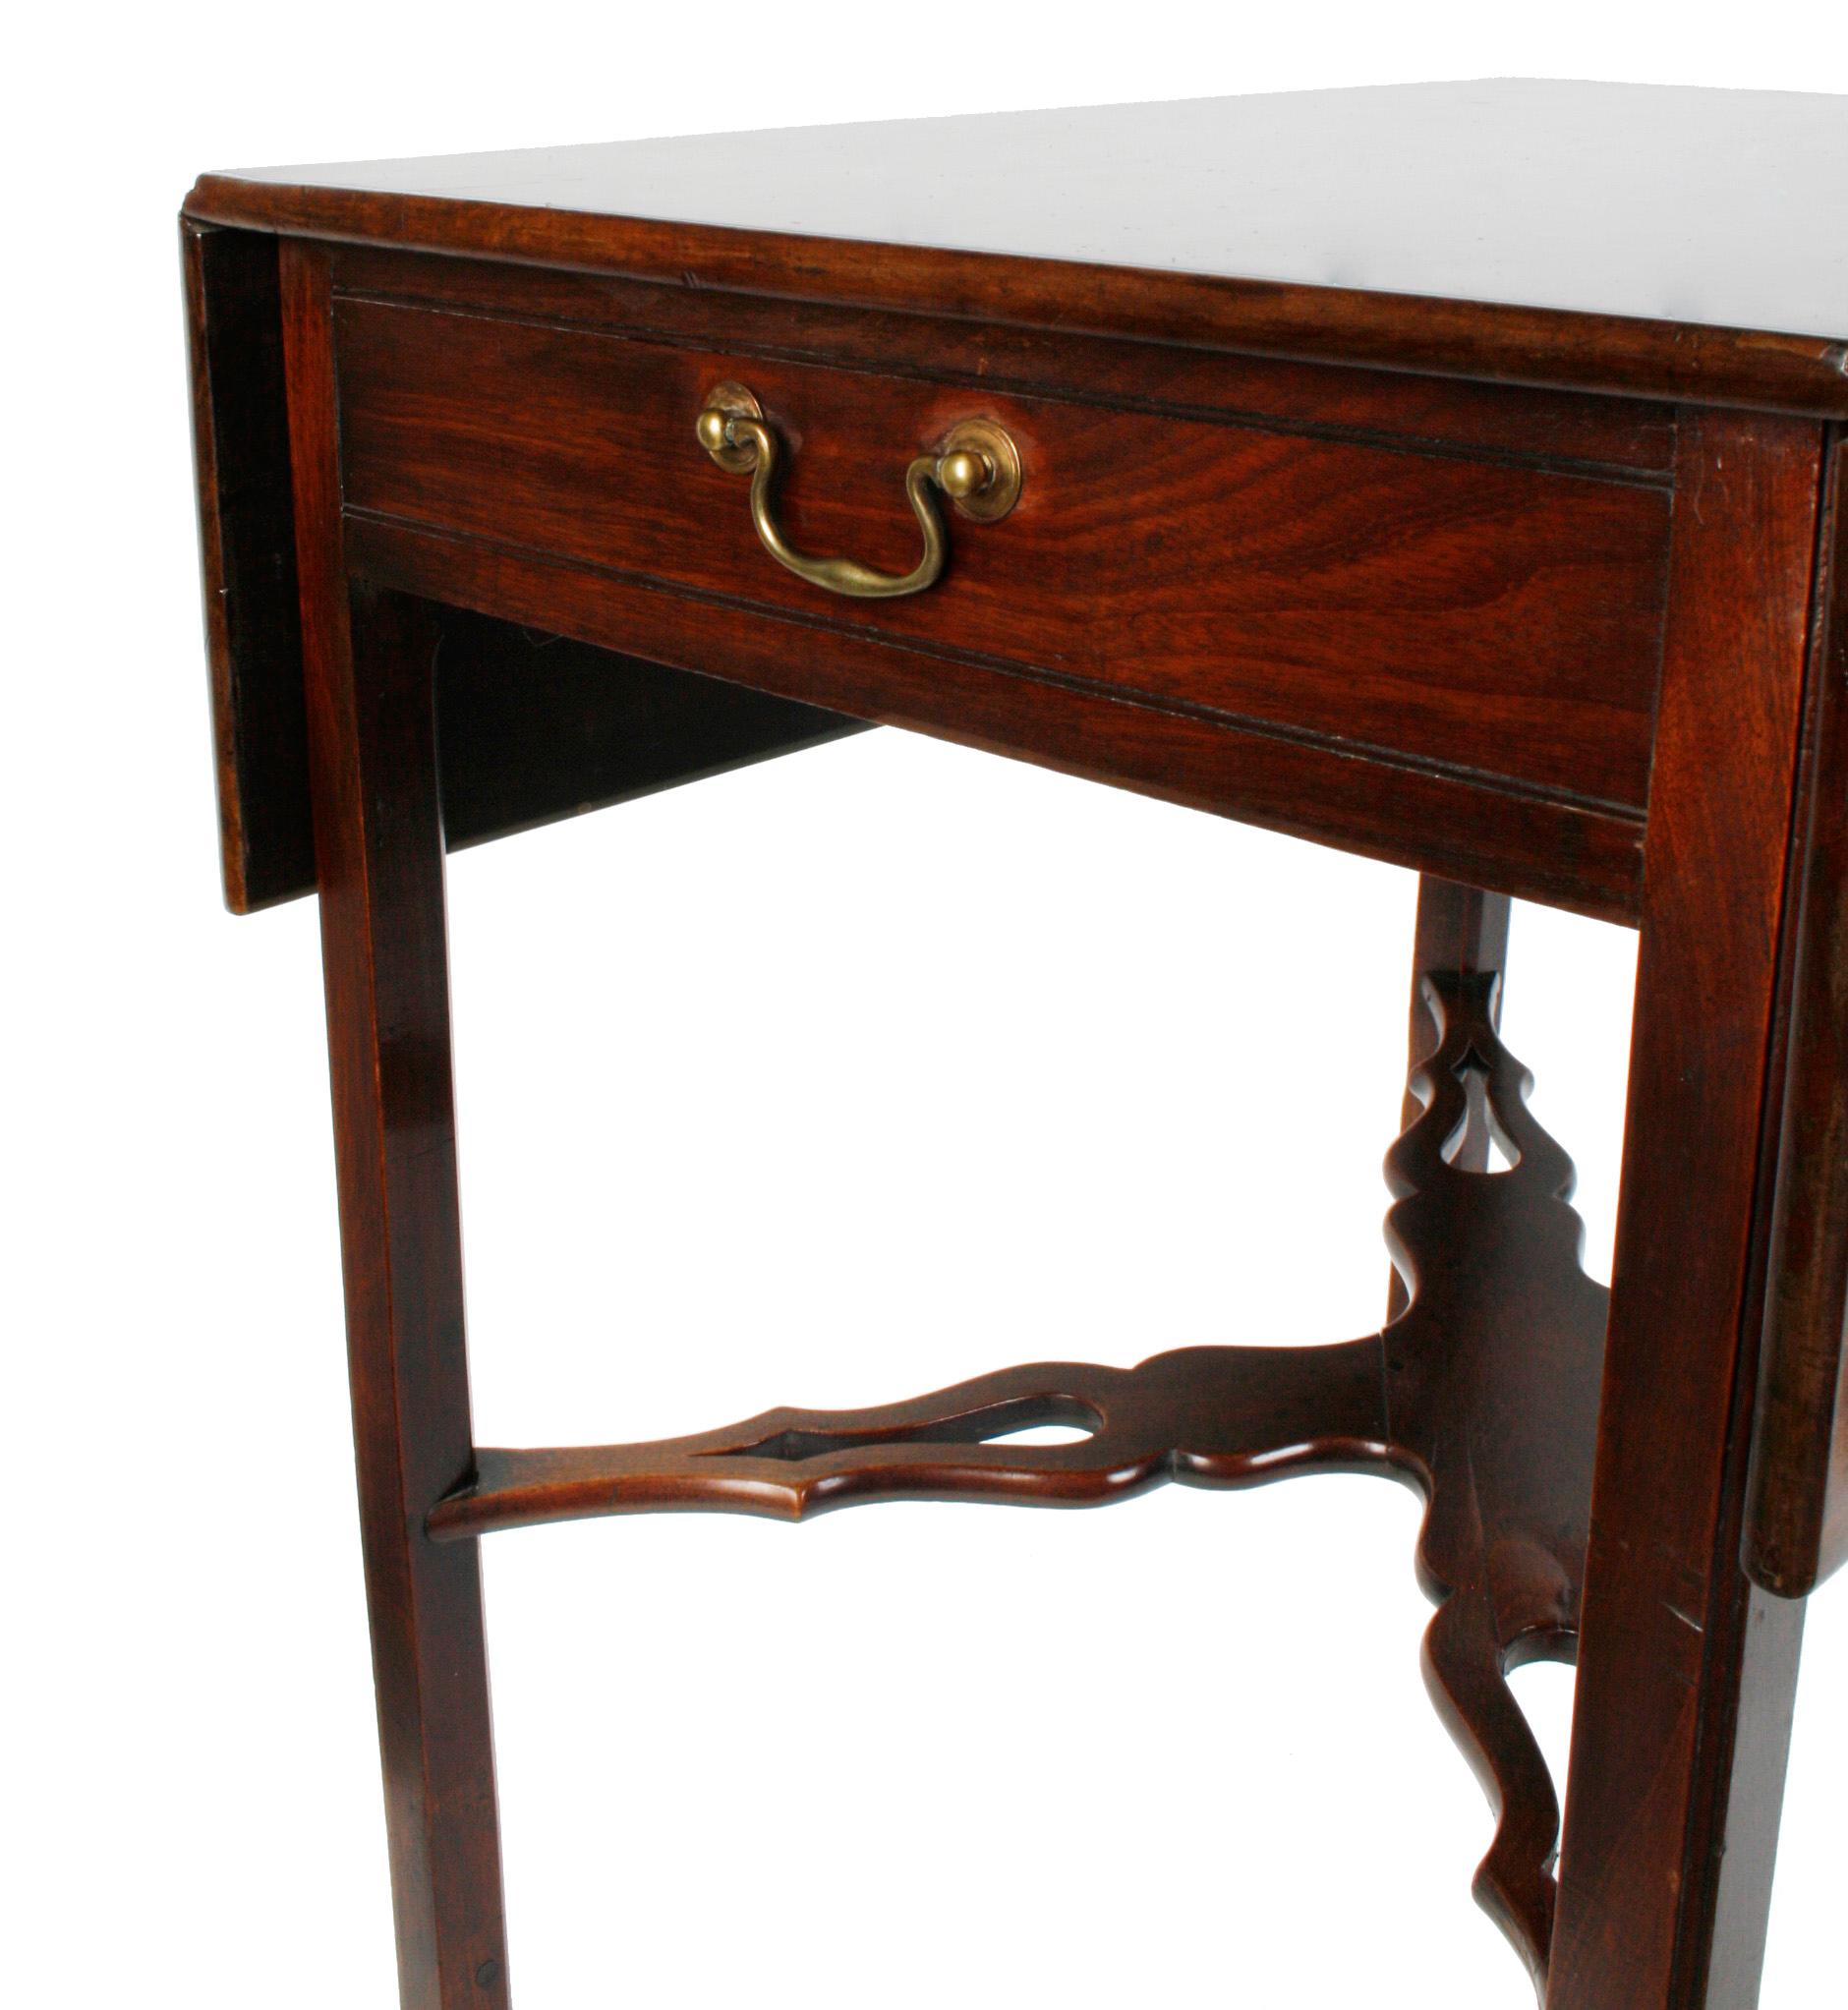 A George III mahogany Pembroke rectangular table with two drop leaves, a pierced X-stretcher and square legs. Both ends have drawers with brass pulls. When table is open is measures: 38